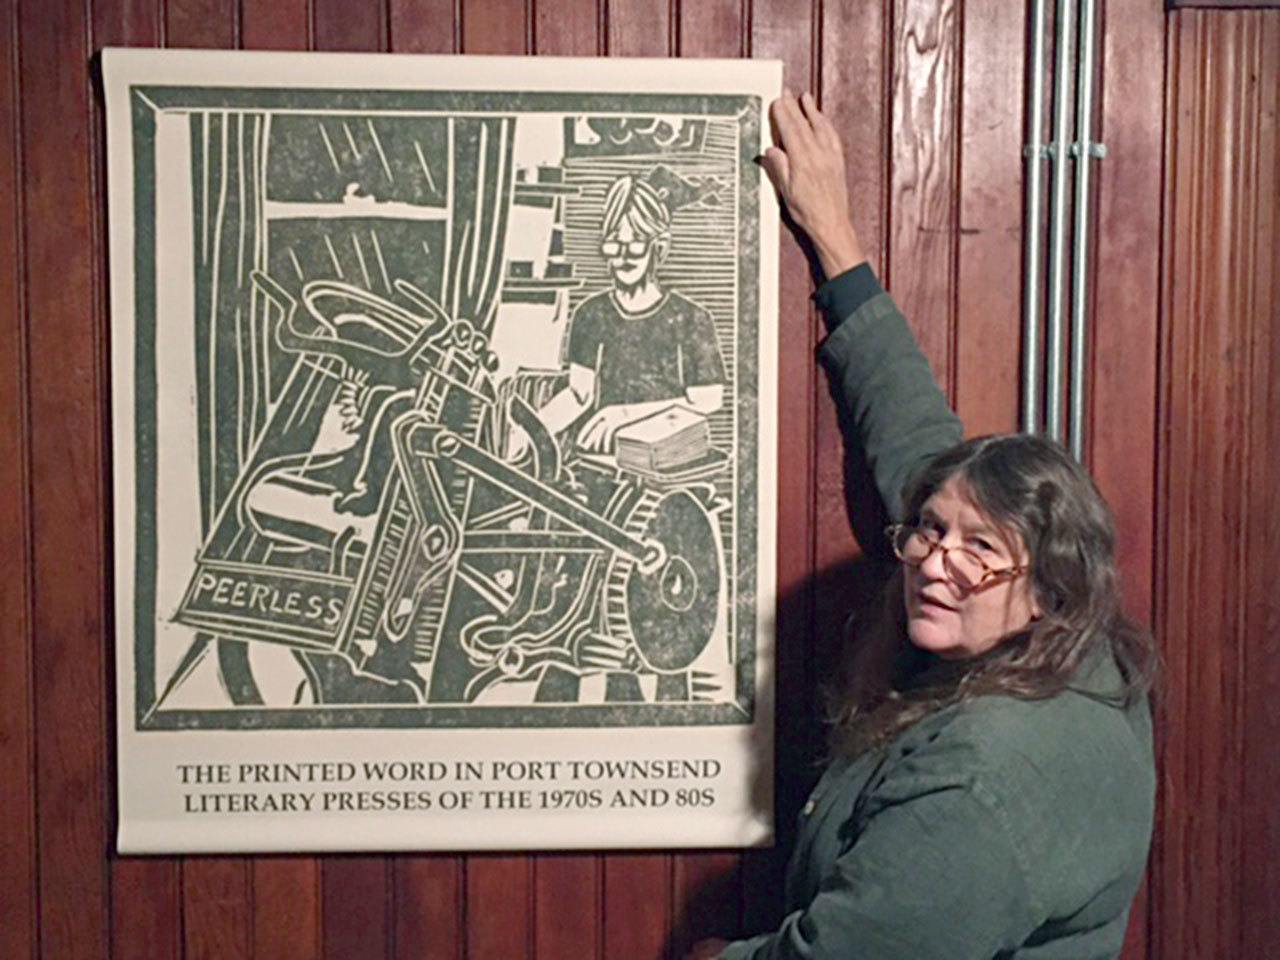 Co-curator Jenny Westdal mounts a display for the Jefferson Museum of Art & History’s new exhibit, “Printed Word in Port Townsend: Literary Presses of the 1970s and ’80s.”